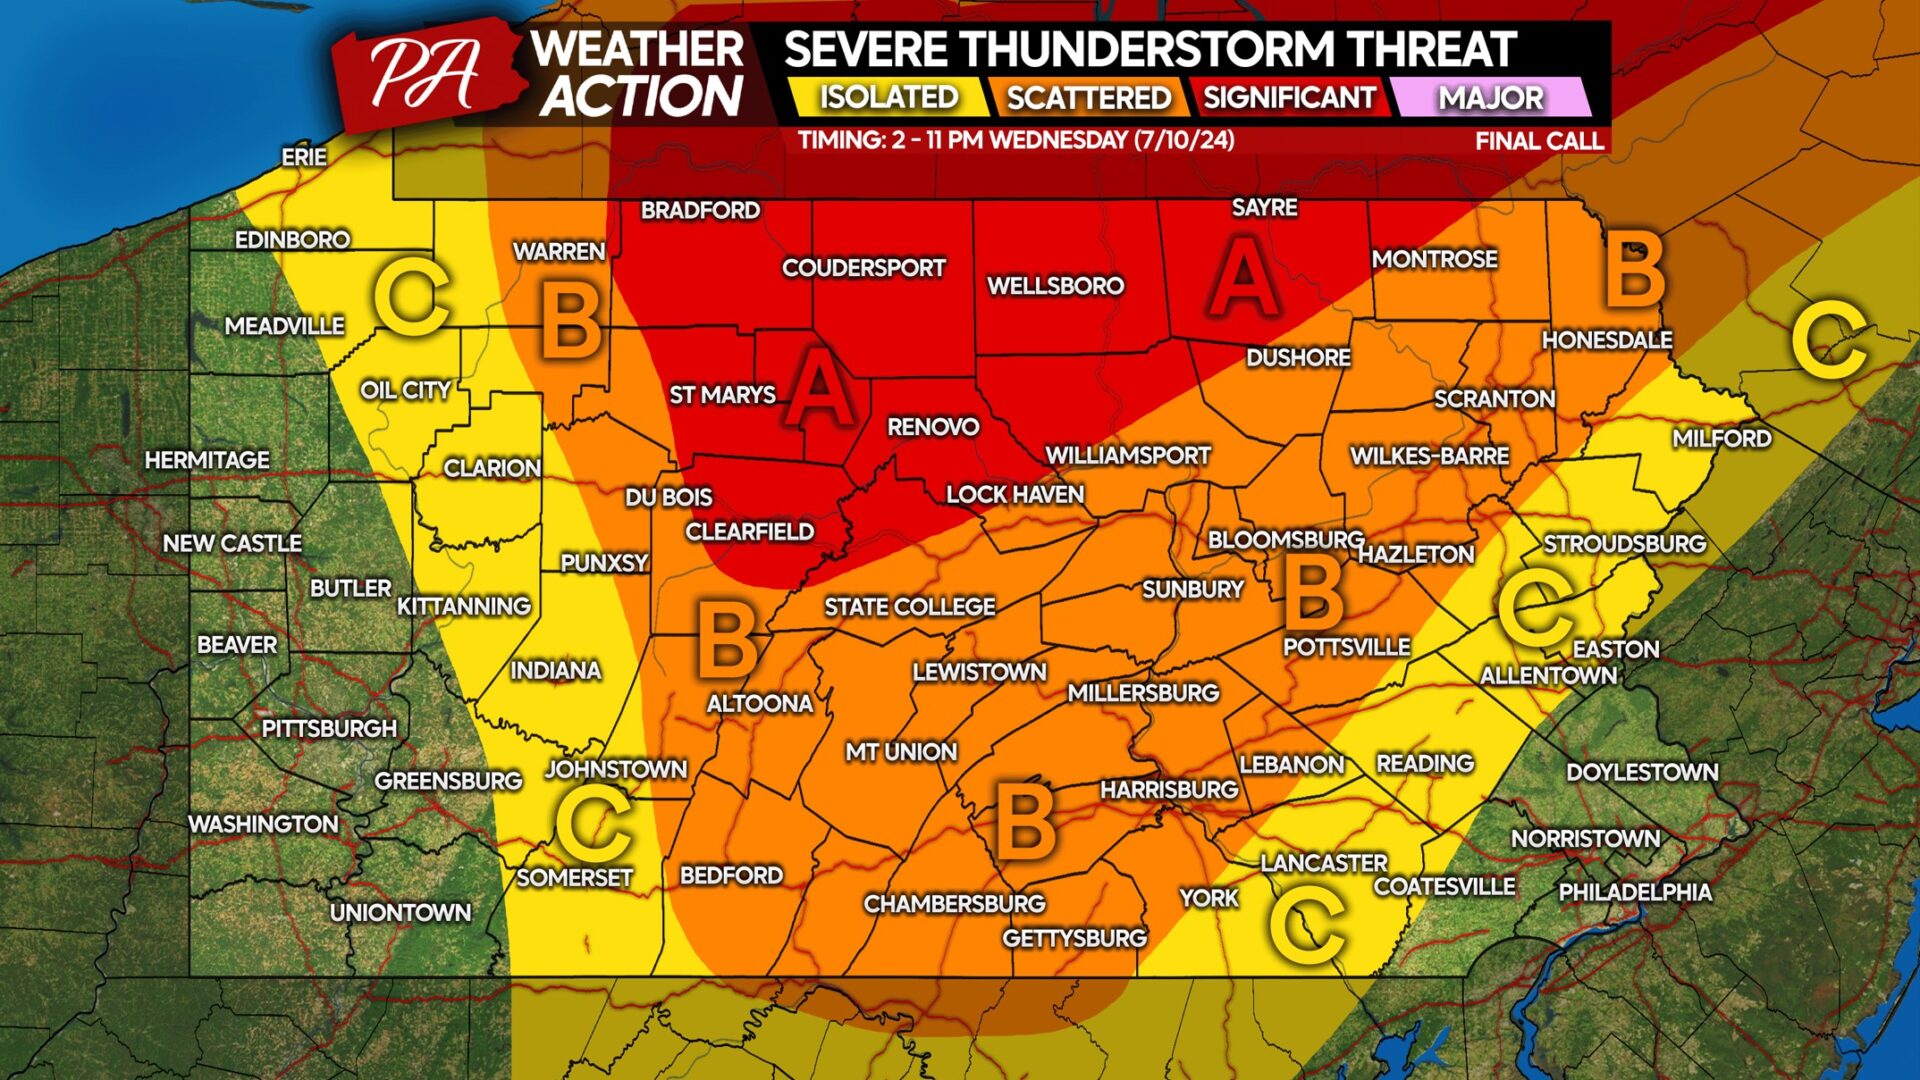 Tornado Threat In Central PA Wednesday As Remnants of Beryl Push Through Region; Heat Indexes Up to 110°